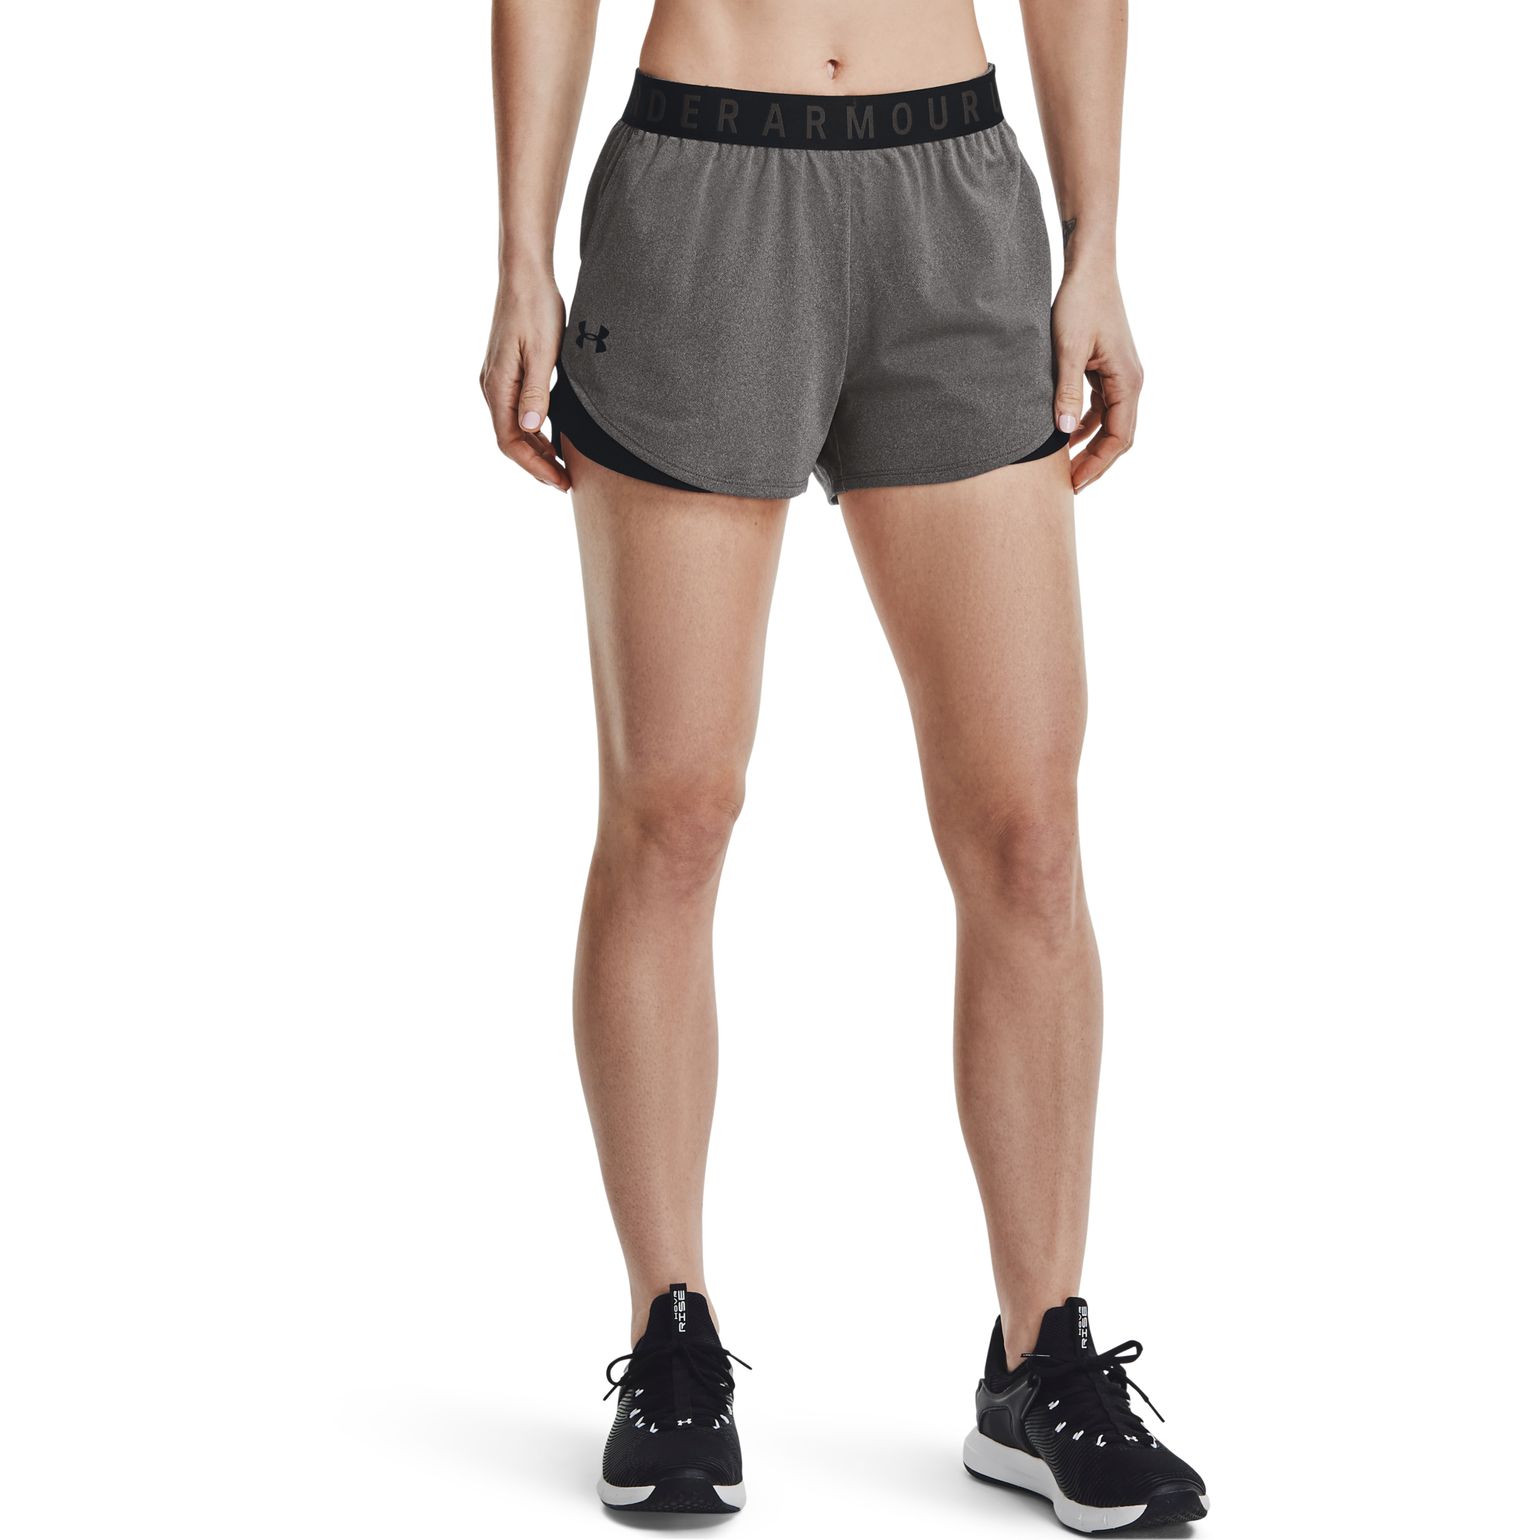 Women's Play Up Shorts 3.0 Carbon Heather